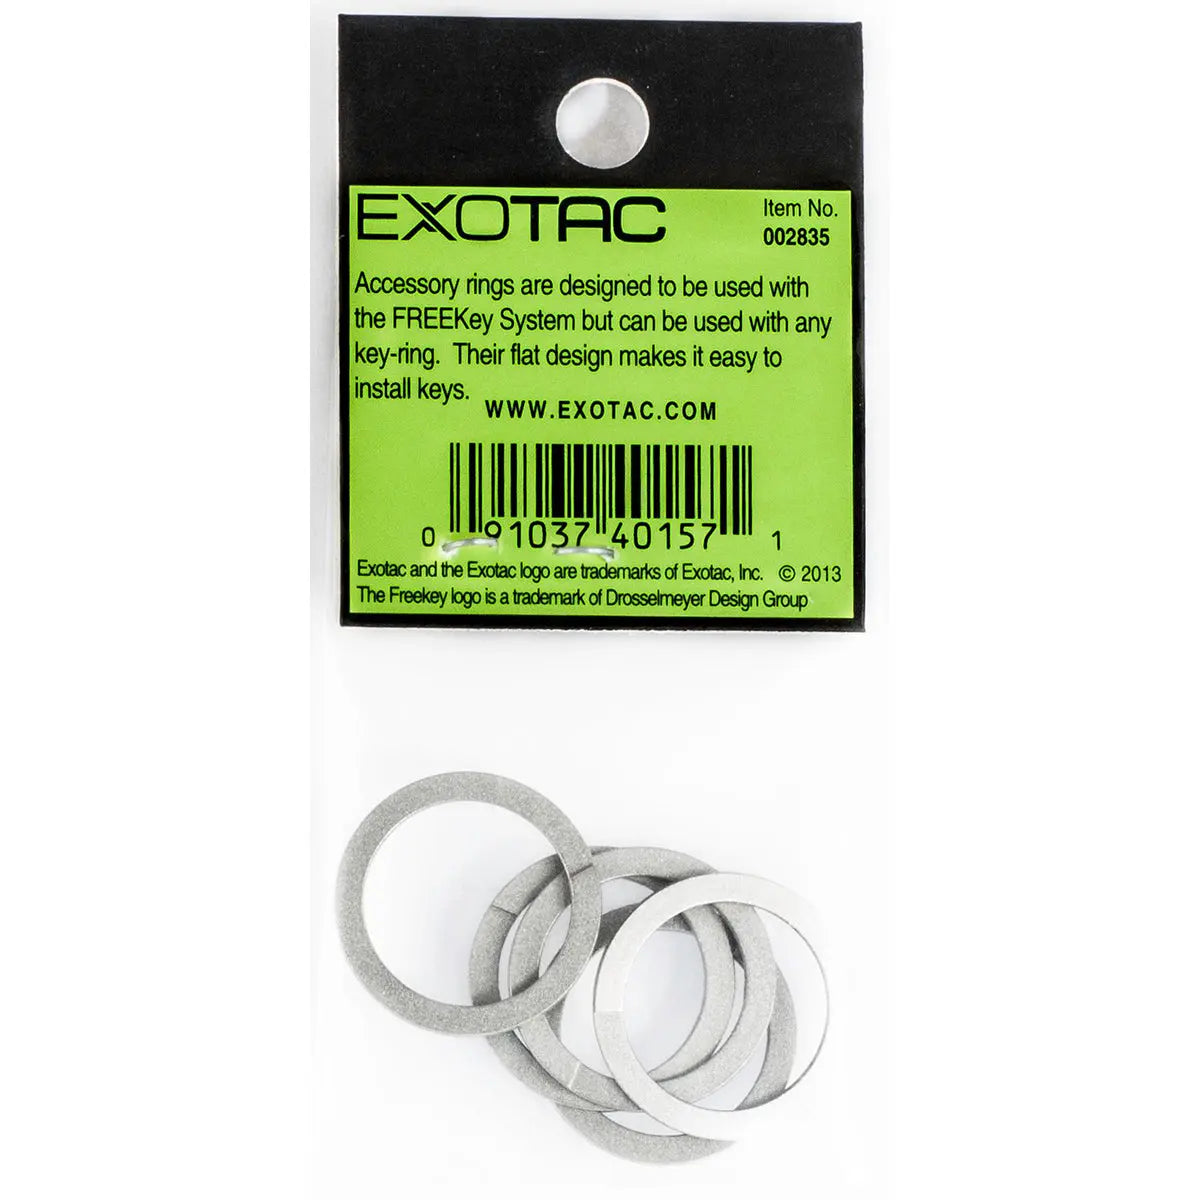 Exotac FREEKey Accessory Spare Key Rings (5 pieces) Exotac